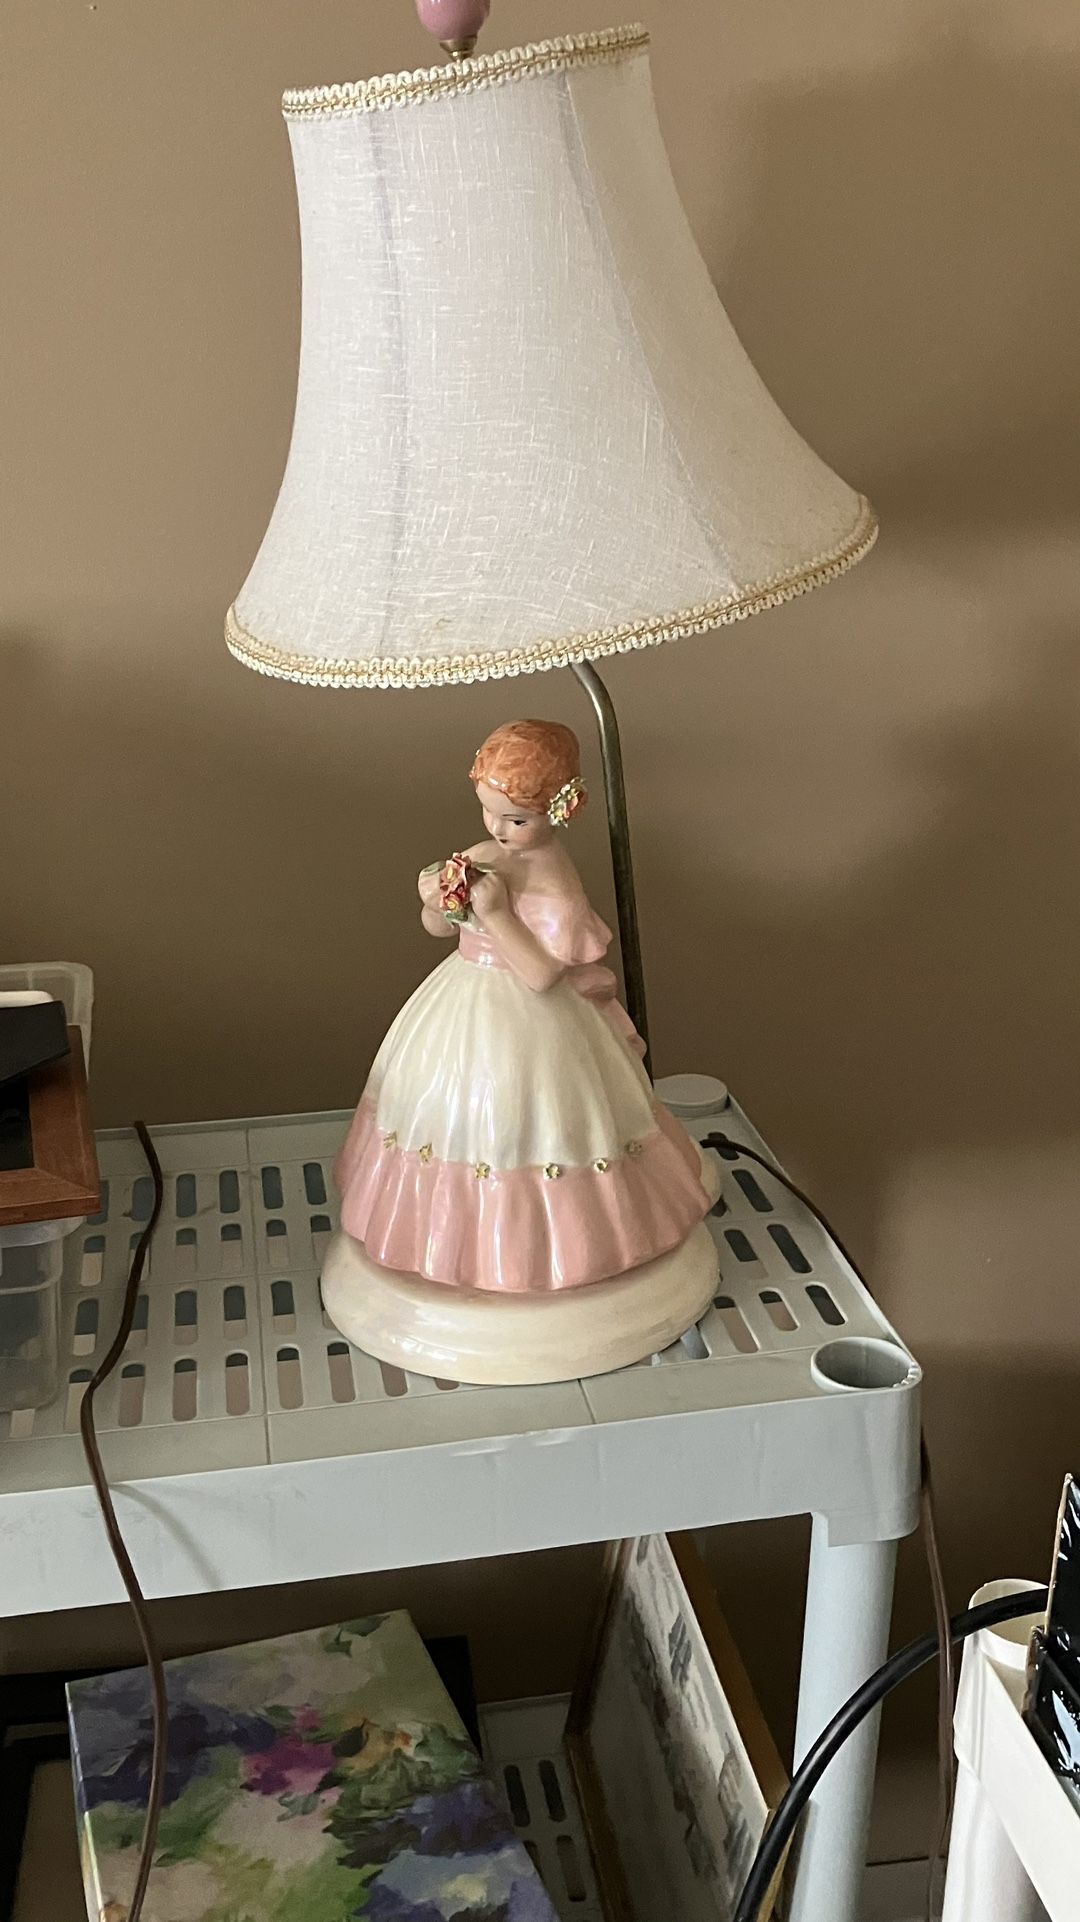 Vintage doll Figurine Lamps $45 All 3 Lamps